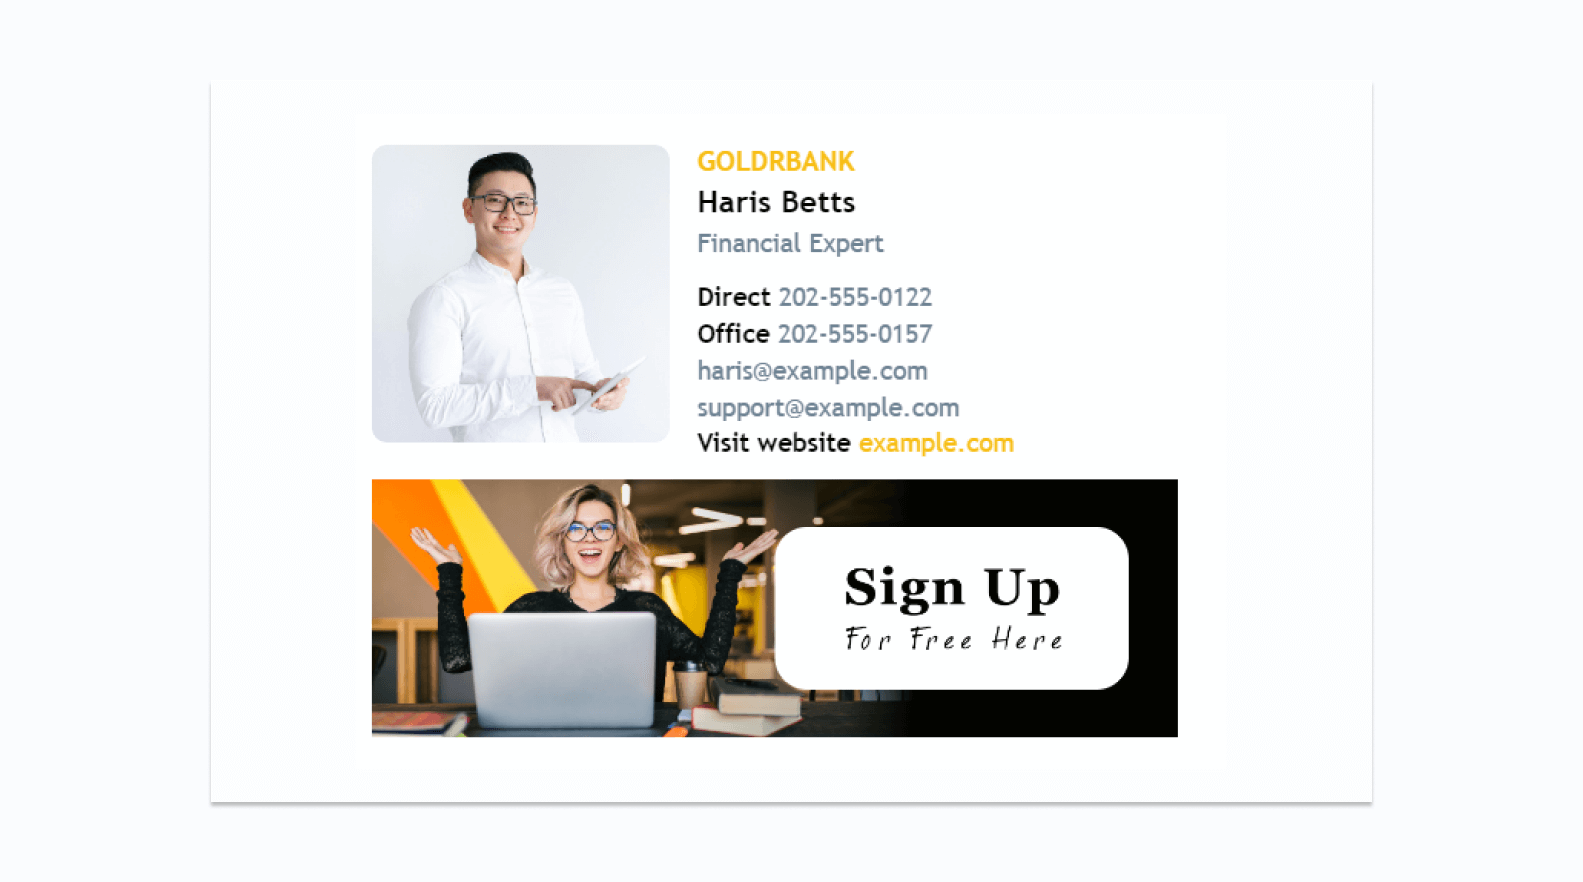 email-signature-banner-sign-up-fo-free